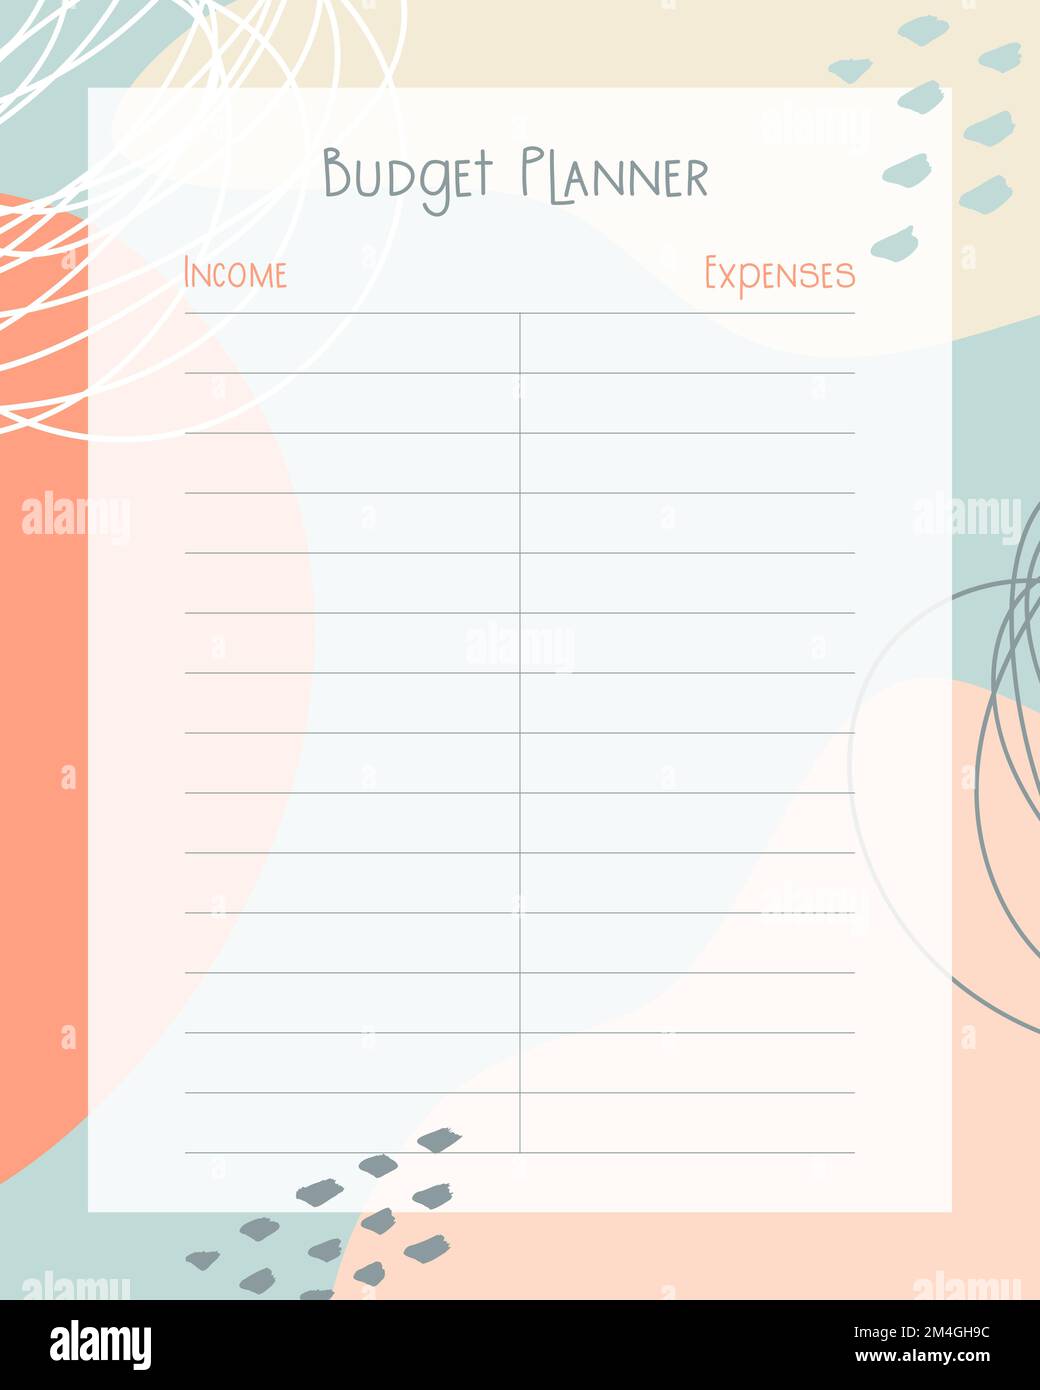 Budget planner template abstract boho style page design, income and expenses. Vector illustration Stock Vector